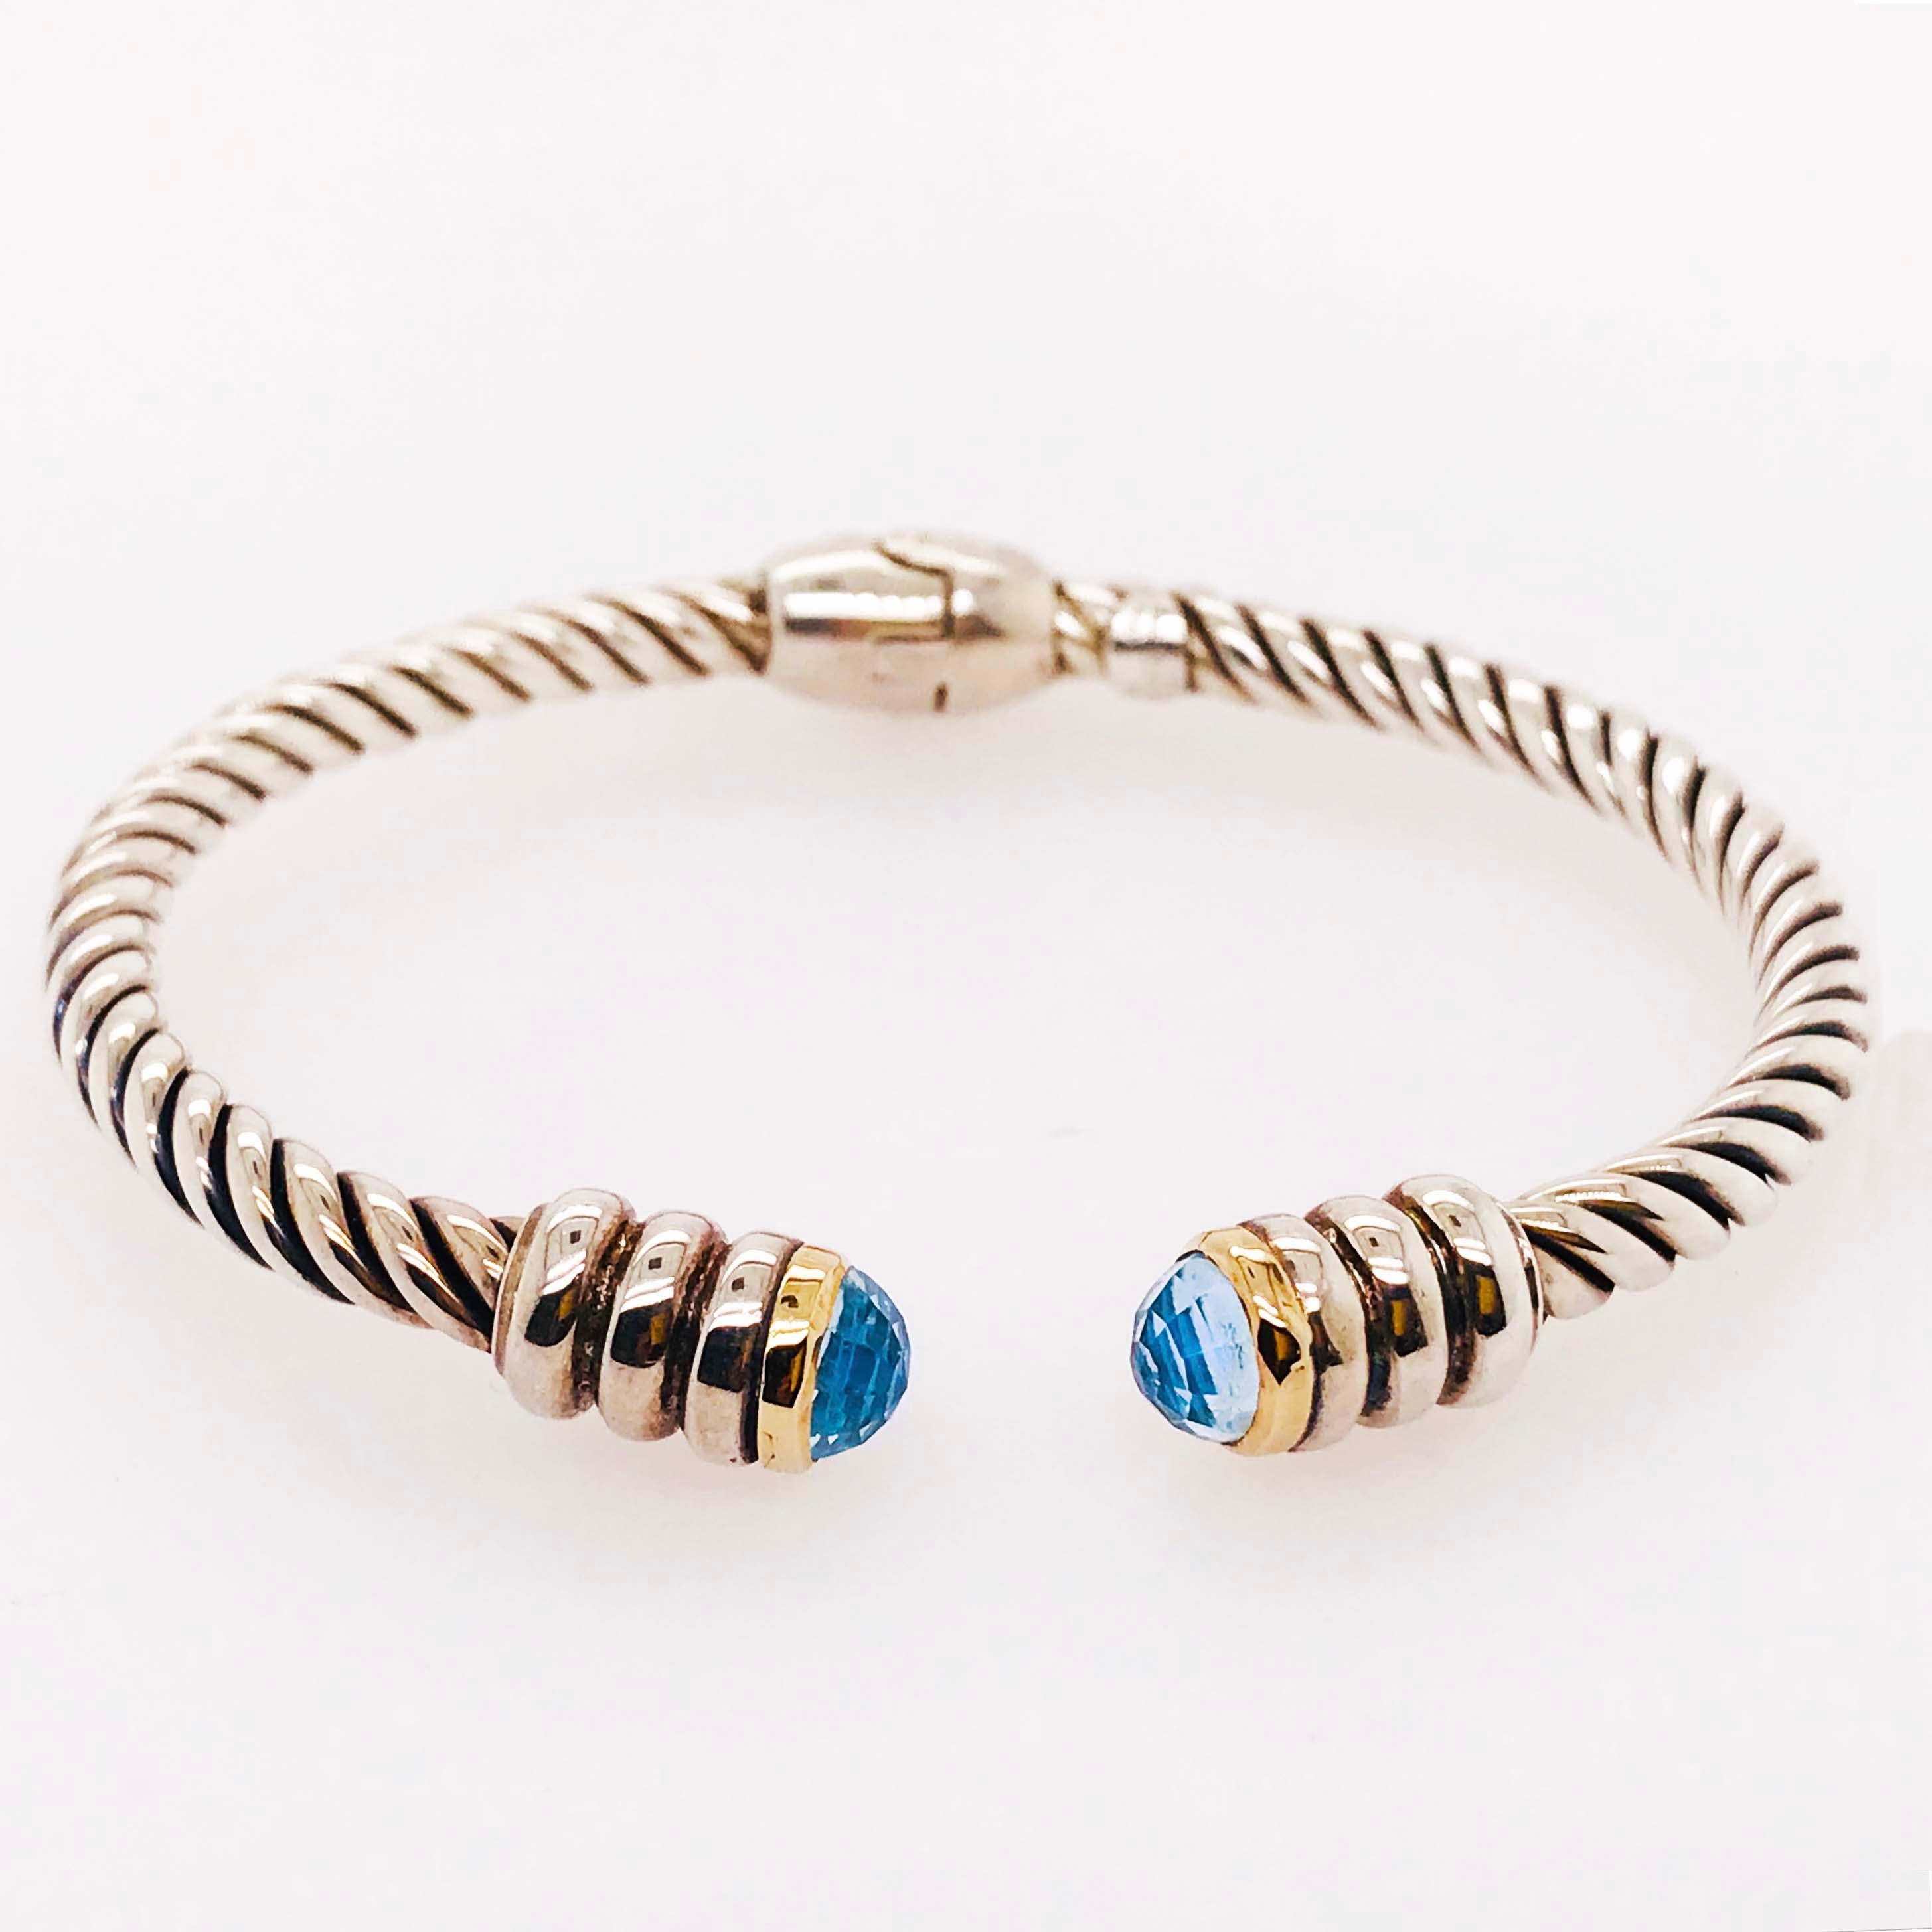 The bangle bracelet is a rope or twisted sterling silver with the 18 karat accent ends that have a faceted blue topaz on either side.  The Phillip Gabriel bracelet is Italian and the Italians are known for their superior craftsmanship!   This